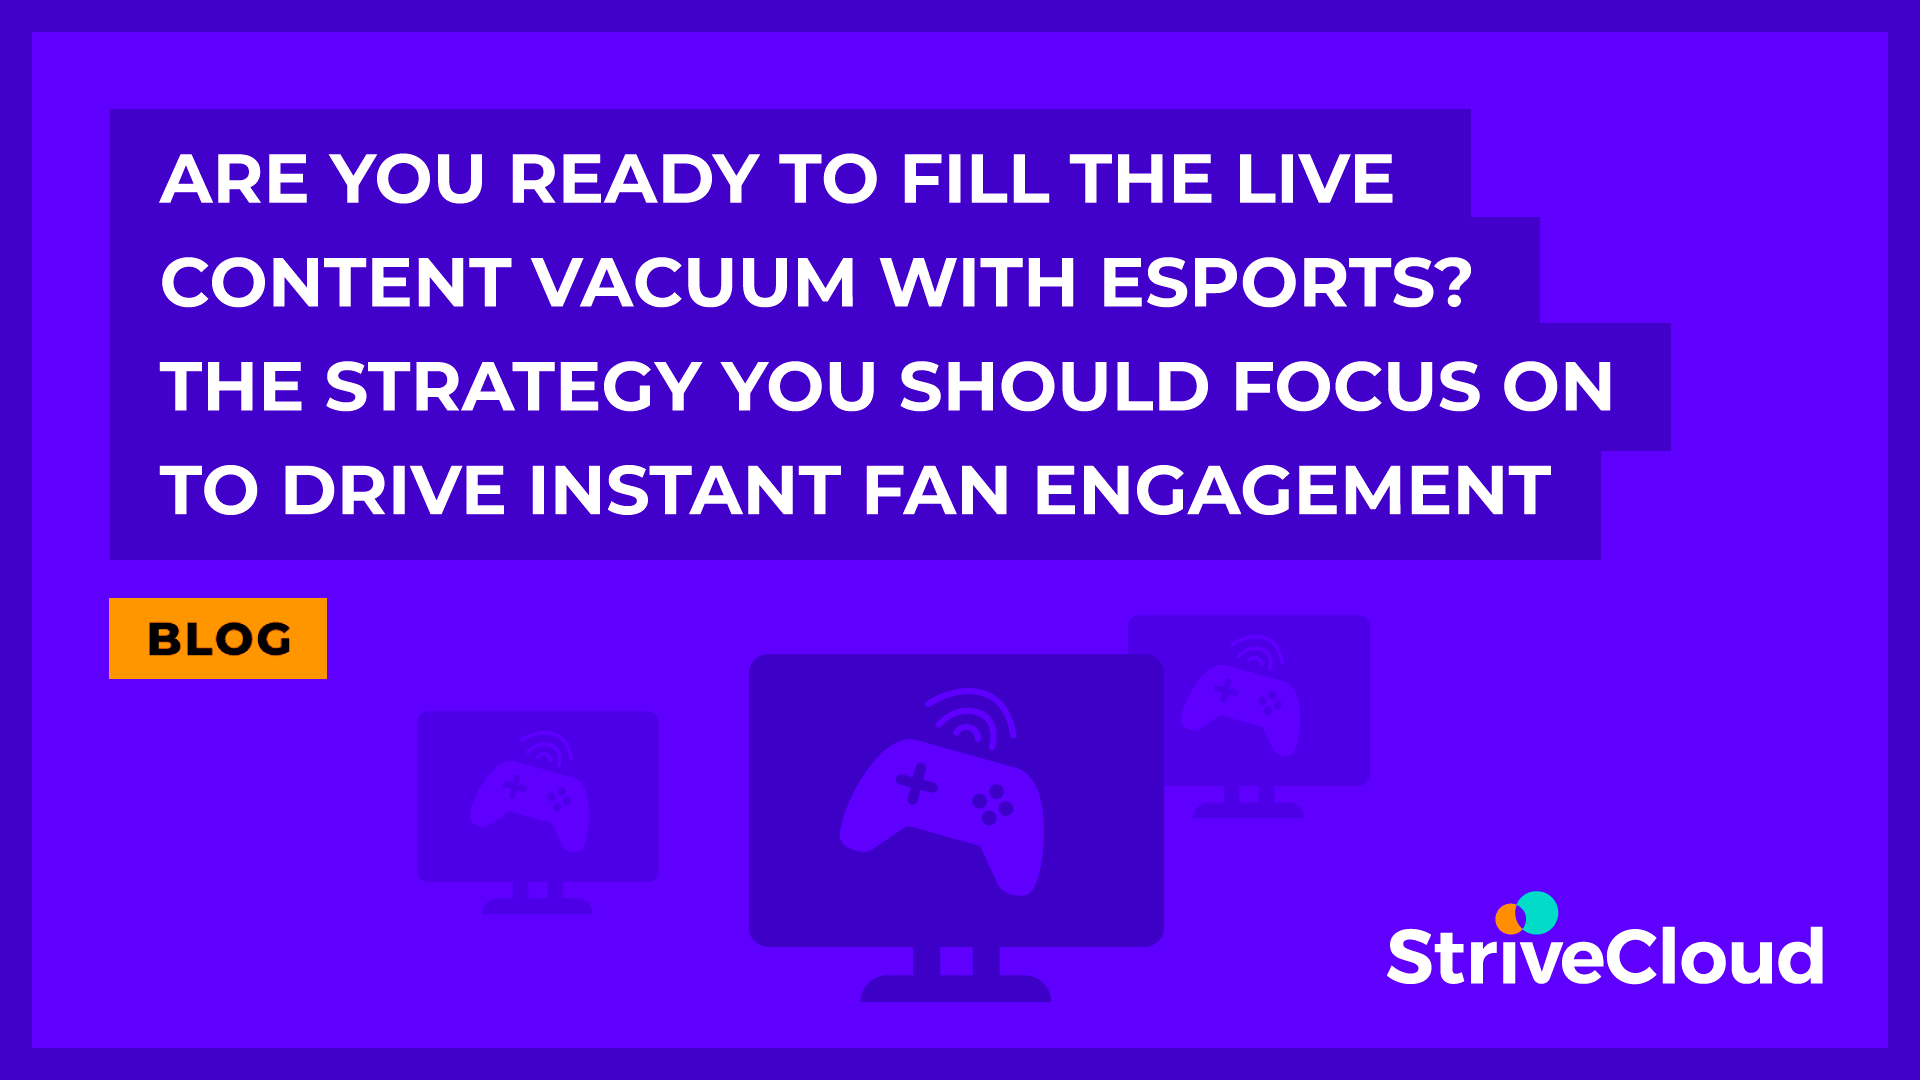 Are you ready to fill the live content vacuum with esports? The strategy you should focus on to drive instant fan engagement